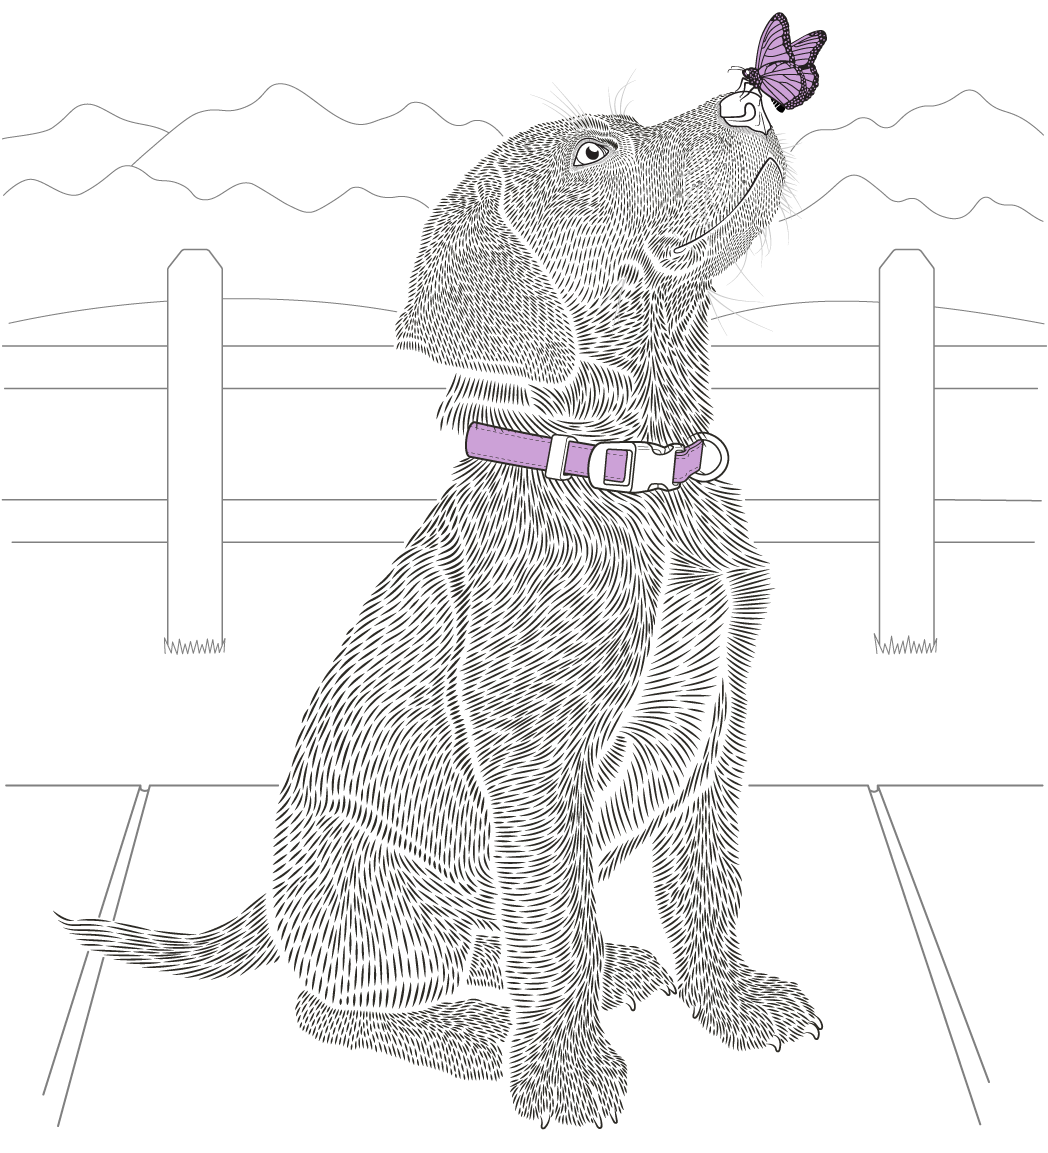 Black and white illustration of a sitting Labrador Retriever puppy with lavender butterfly on its nose